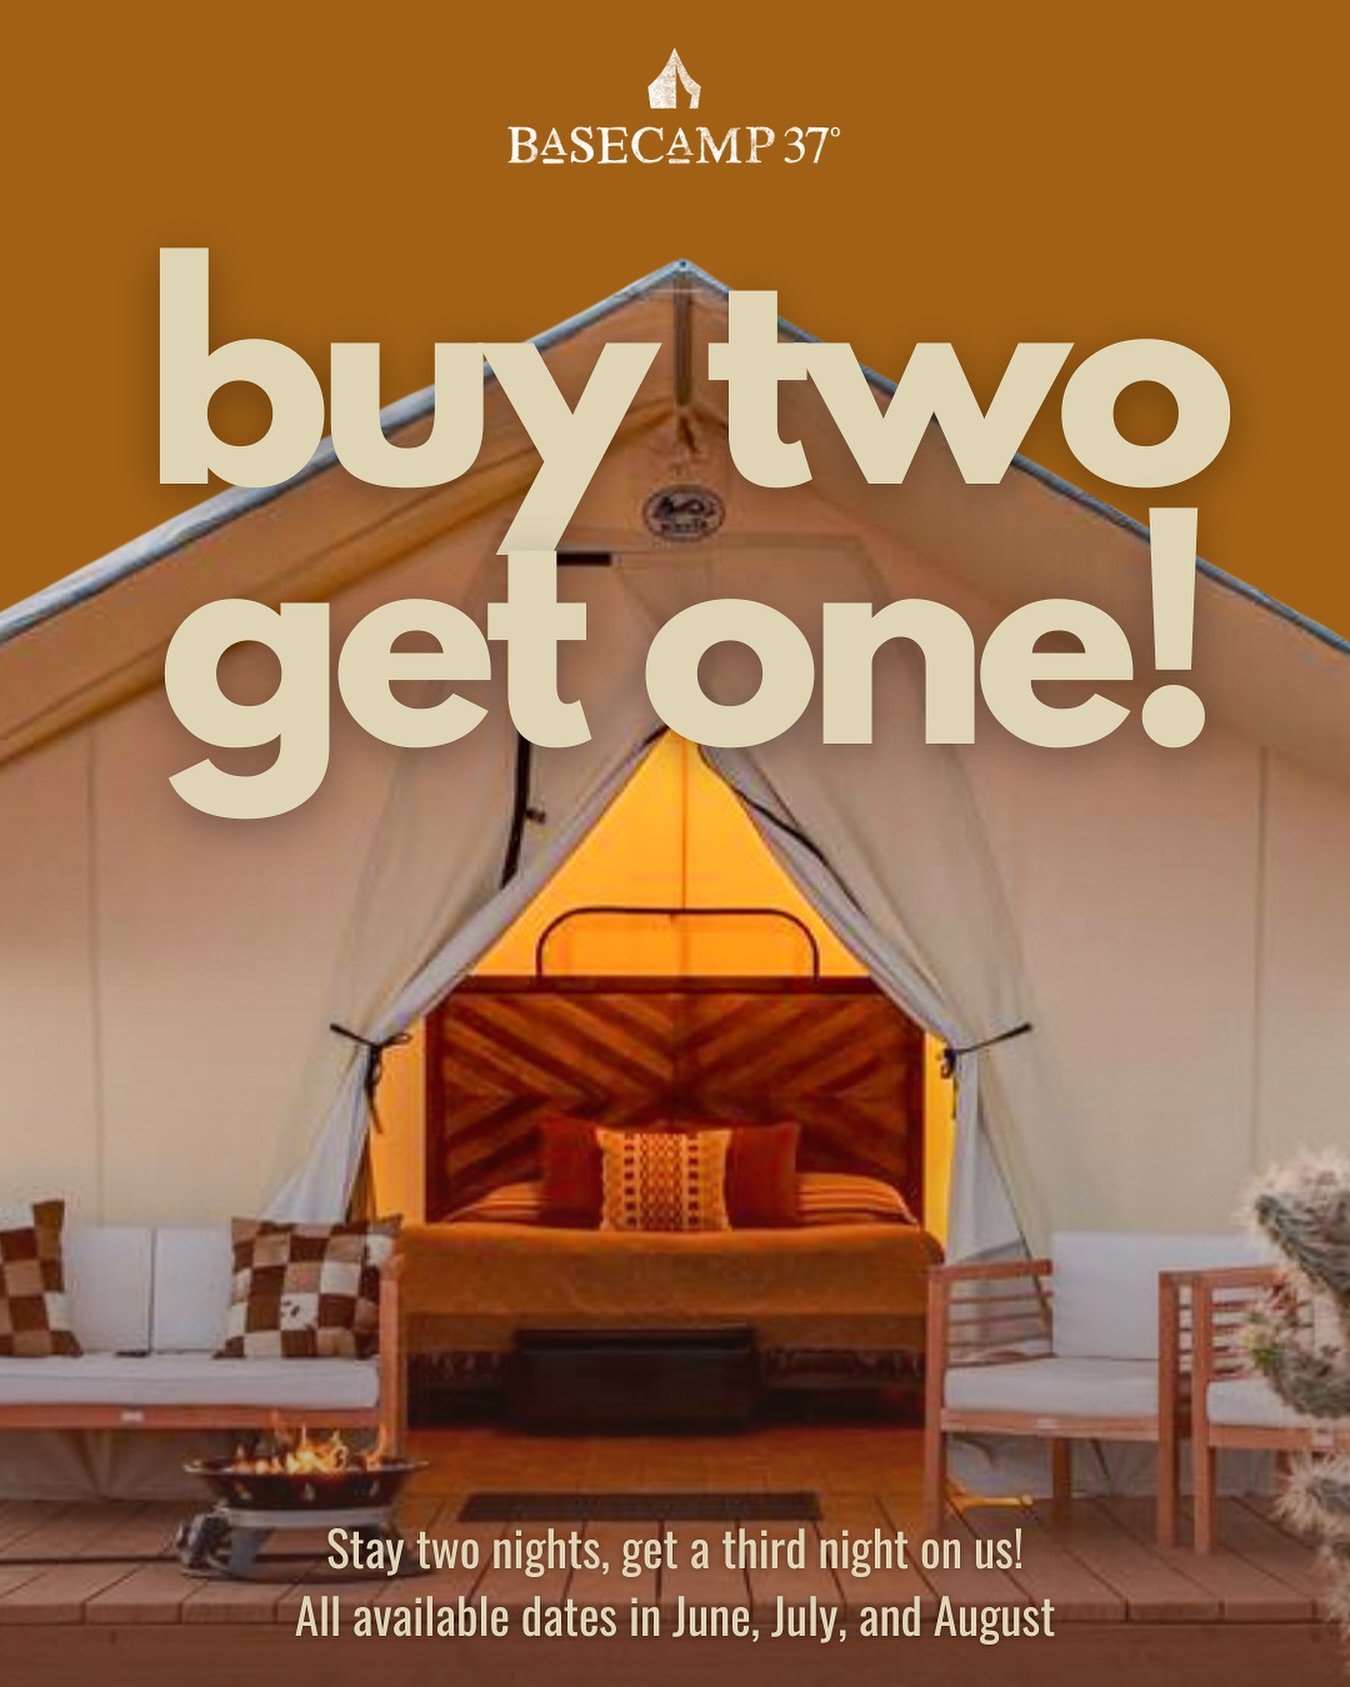 A free night stay at BaseCamp37? Yes, please 😎 Say hello to our unbelievably sweet summer promotion!

Here&rsquo;s the deal ➡️ When you book two nights in June, July, and August, you&rsquo;ll get a third night on us. That&rsquo;s it! No blackout dat